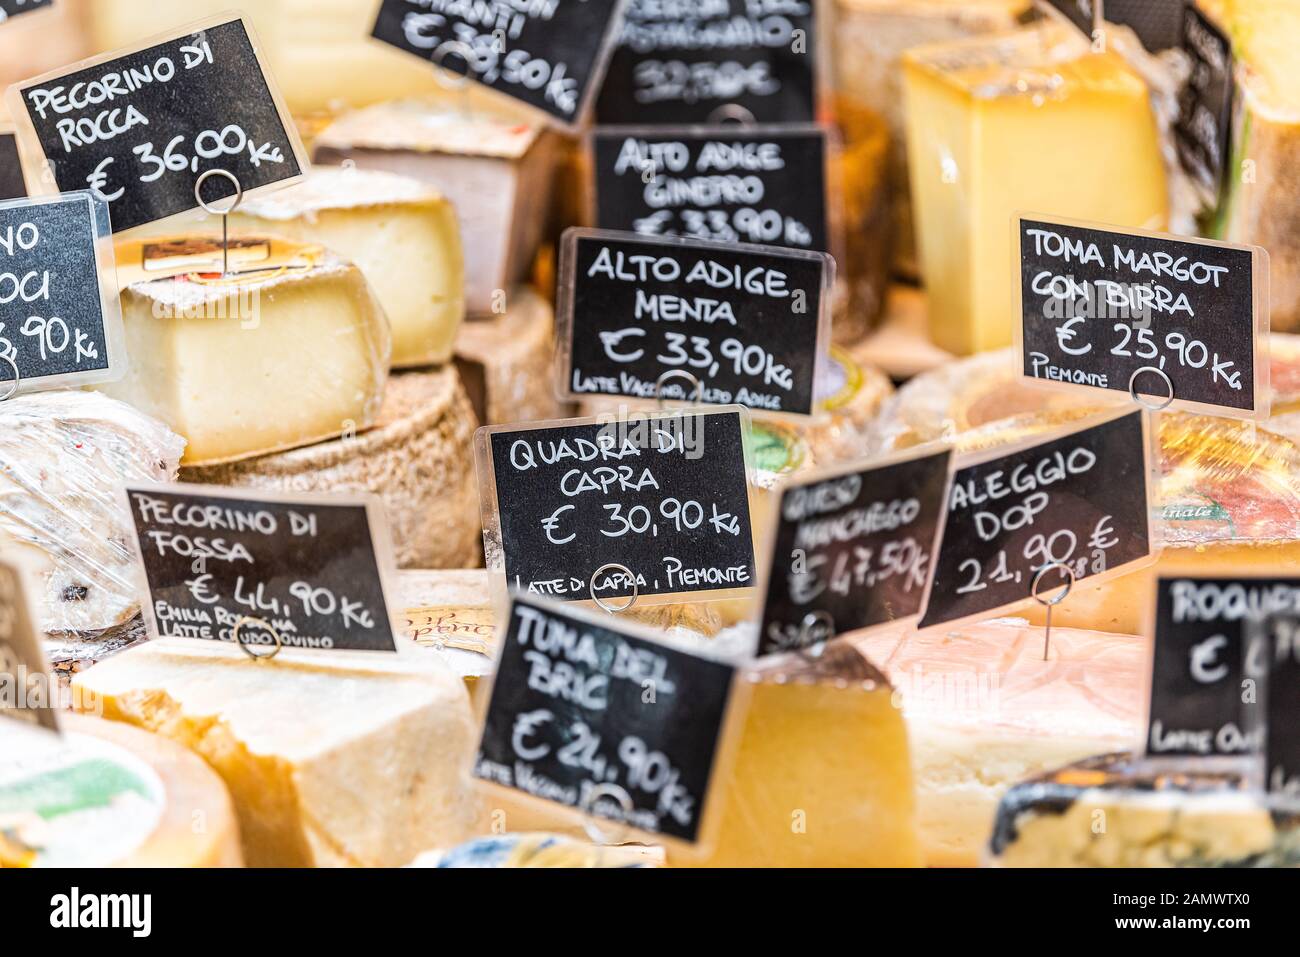 Florence, Italy - August 30, 2018: Many varieties of Italian cheese food on display in Firenze Italy central market with sign prices Stock Photo